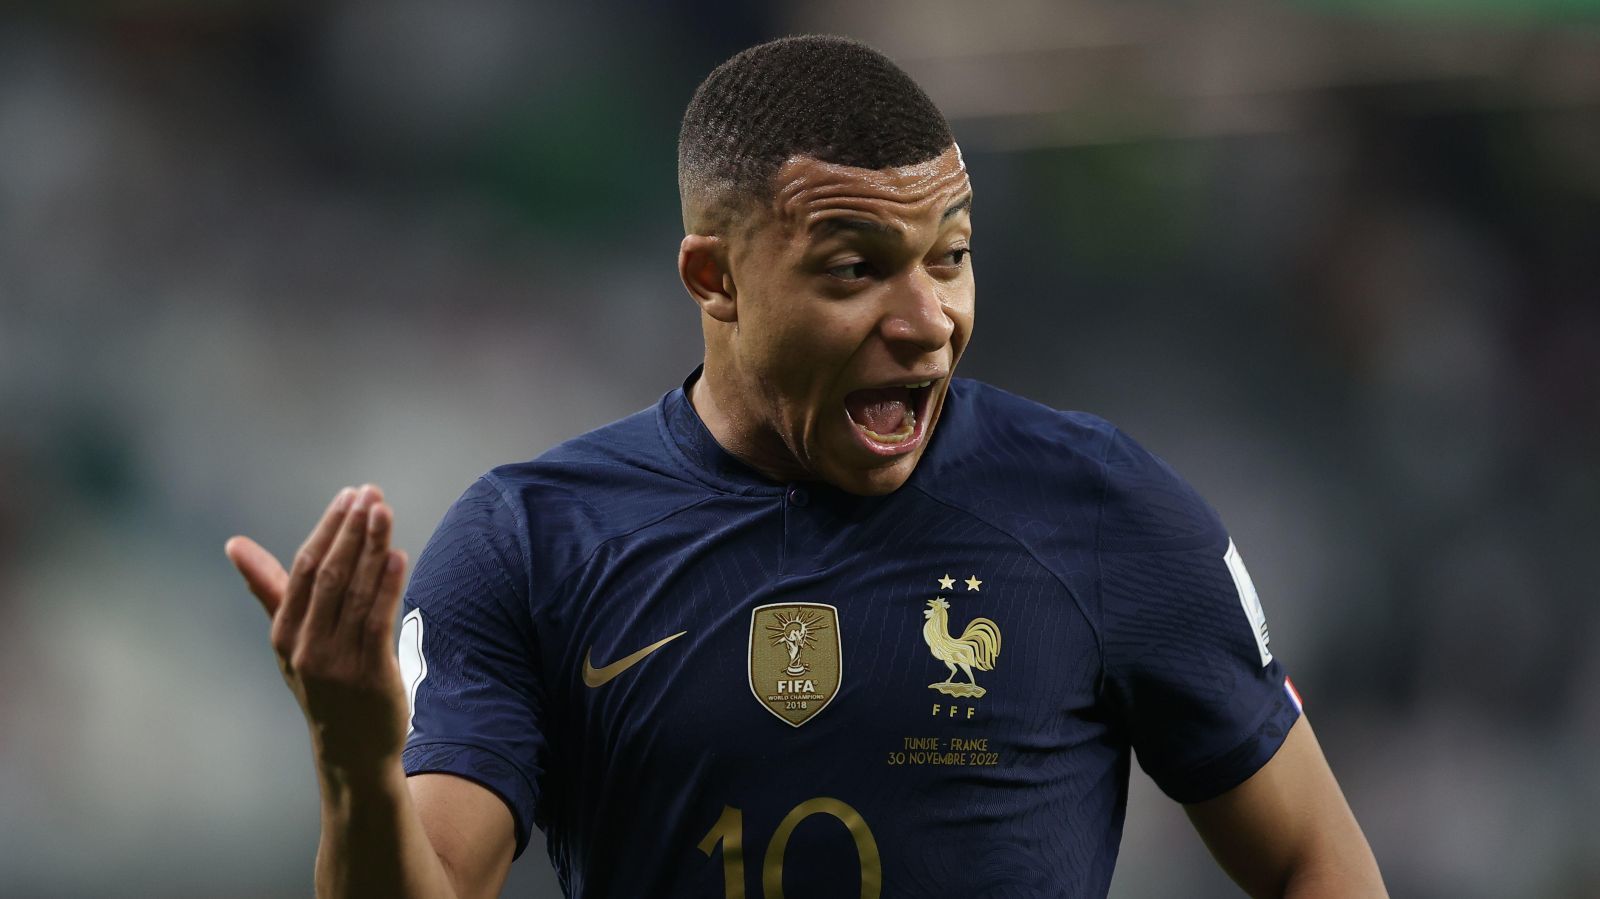 Mbappe may become new captain of French team